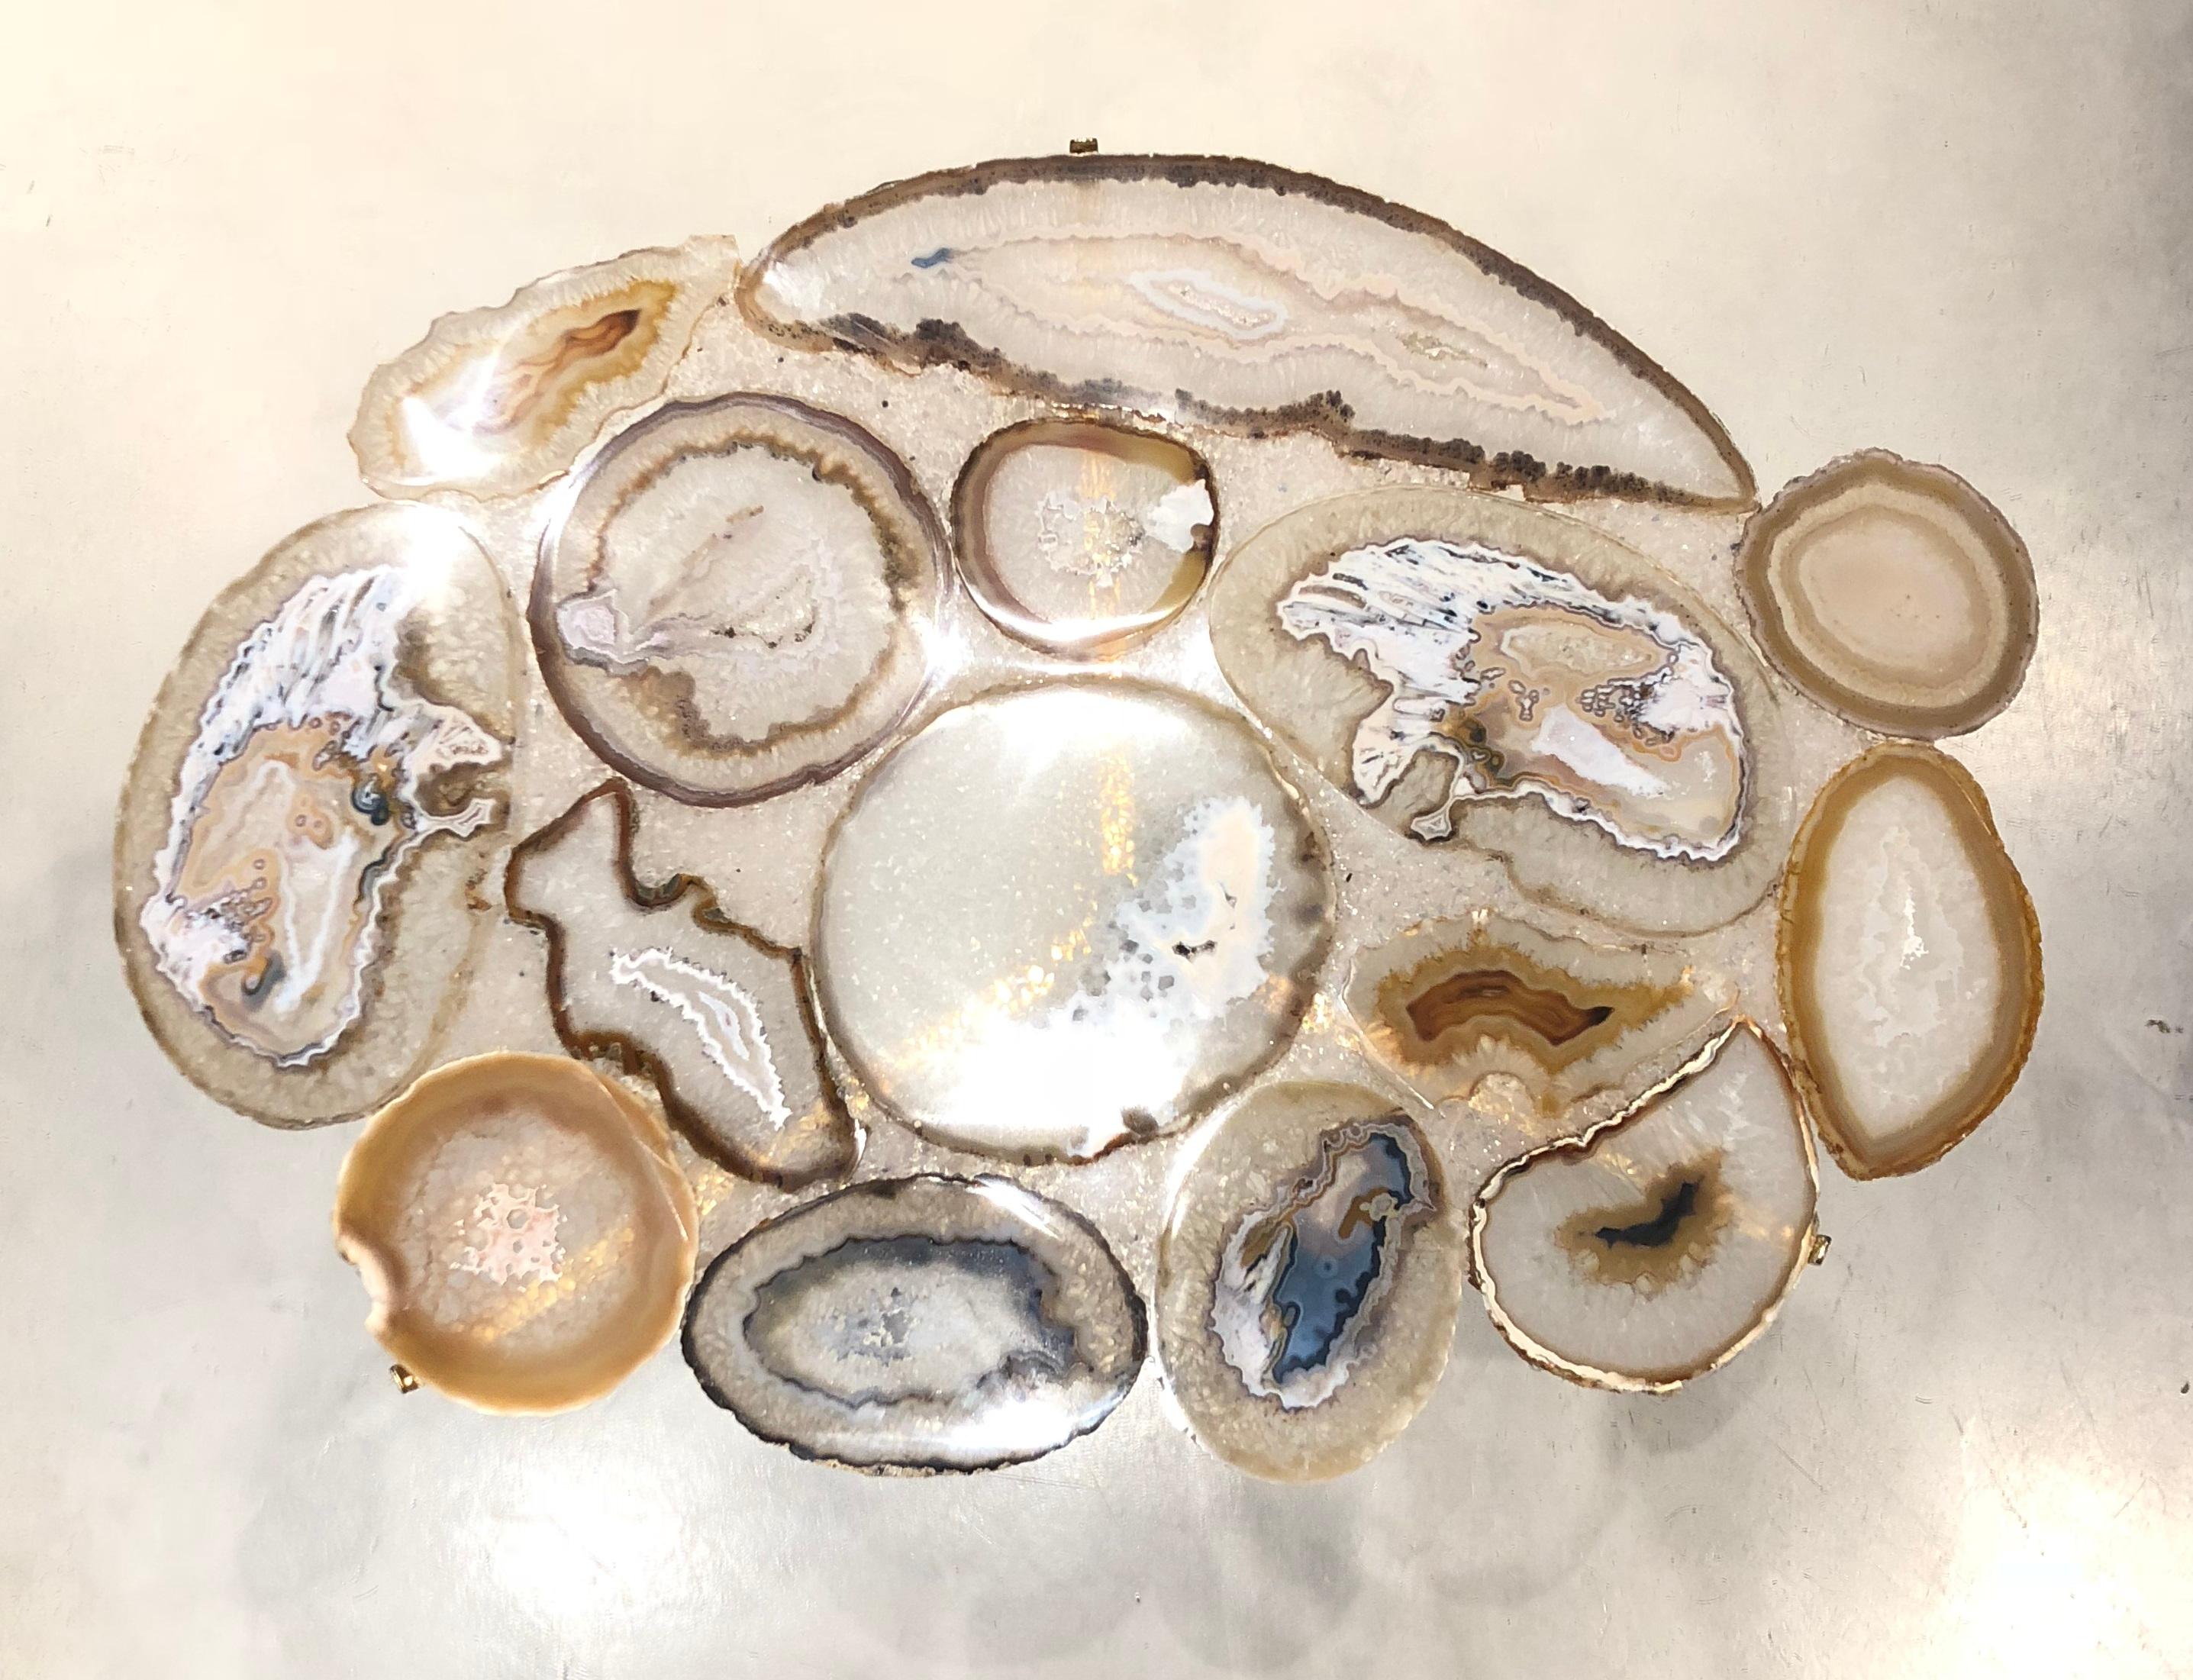 Created with resin and agate blades natural. Base in polished brass.
The natural stone integrates with the different design languages, combining straight and sinuous curves in a sophisticated fluidity.
The different colors of stones range from